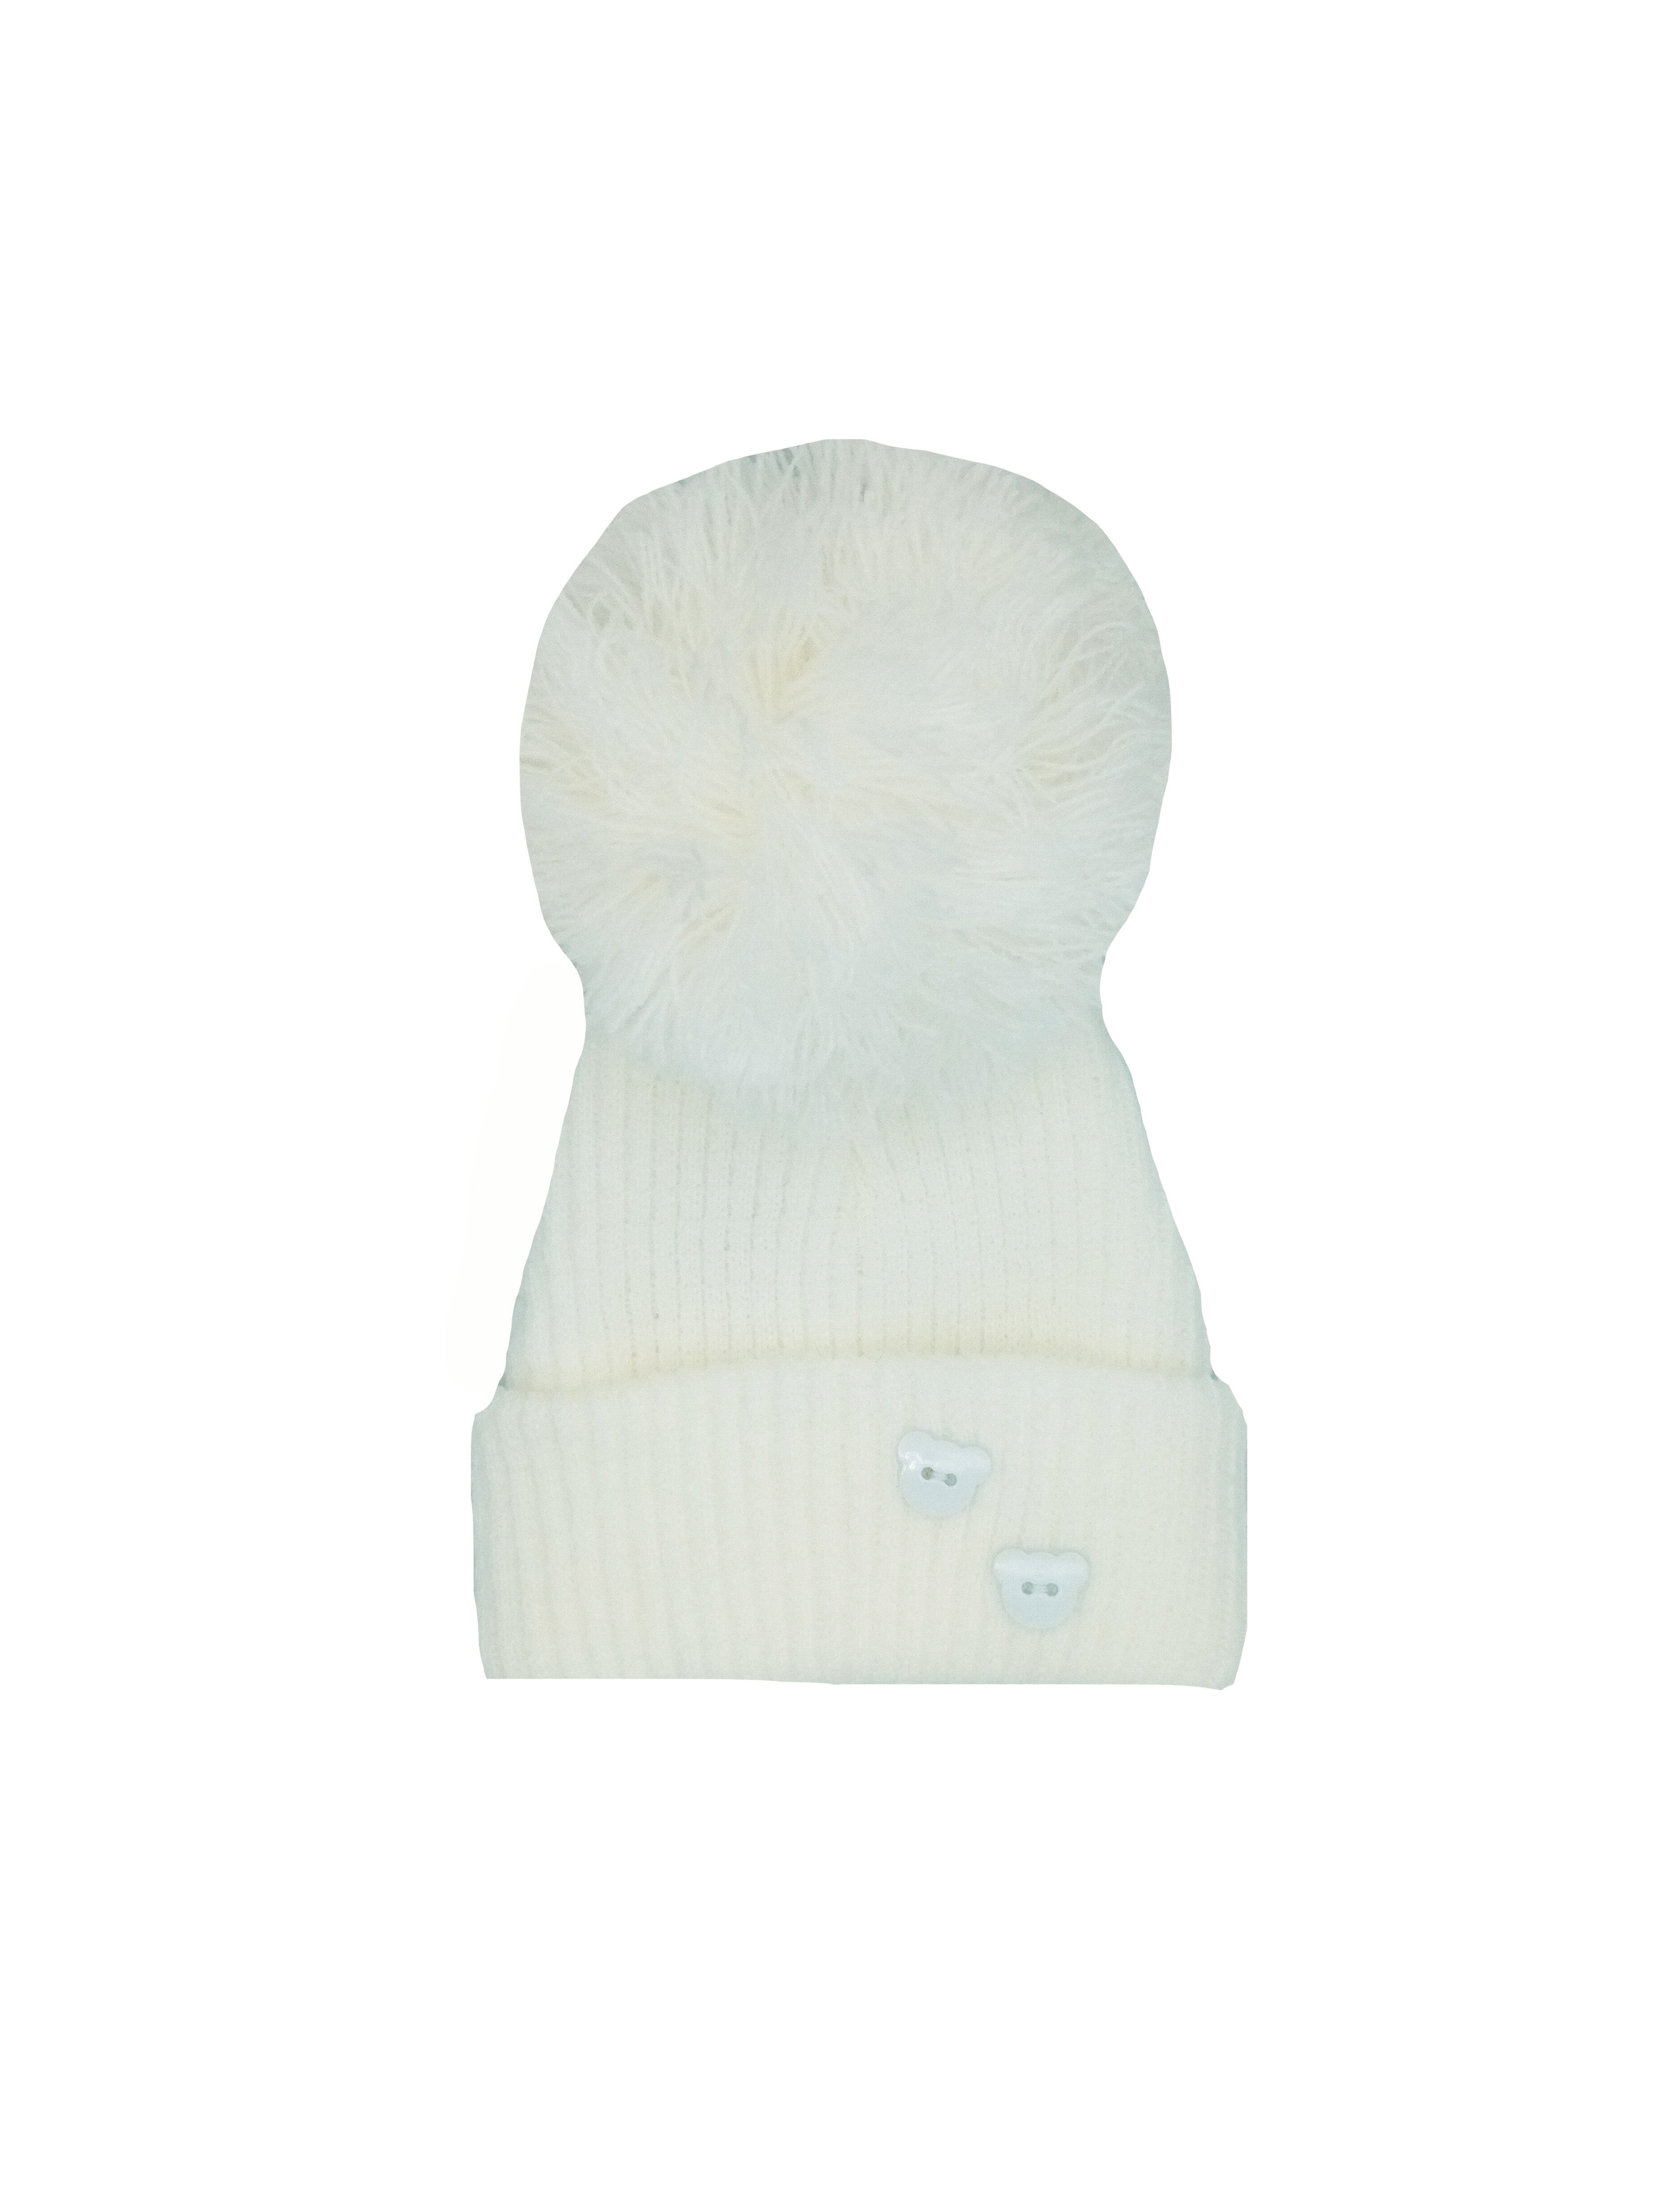 White Knitted Pom Pom Hat - Hat - Little Mouse Baby Clothing and Gifts Ltd